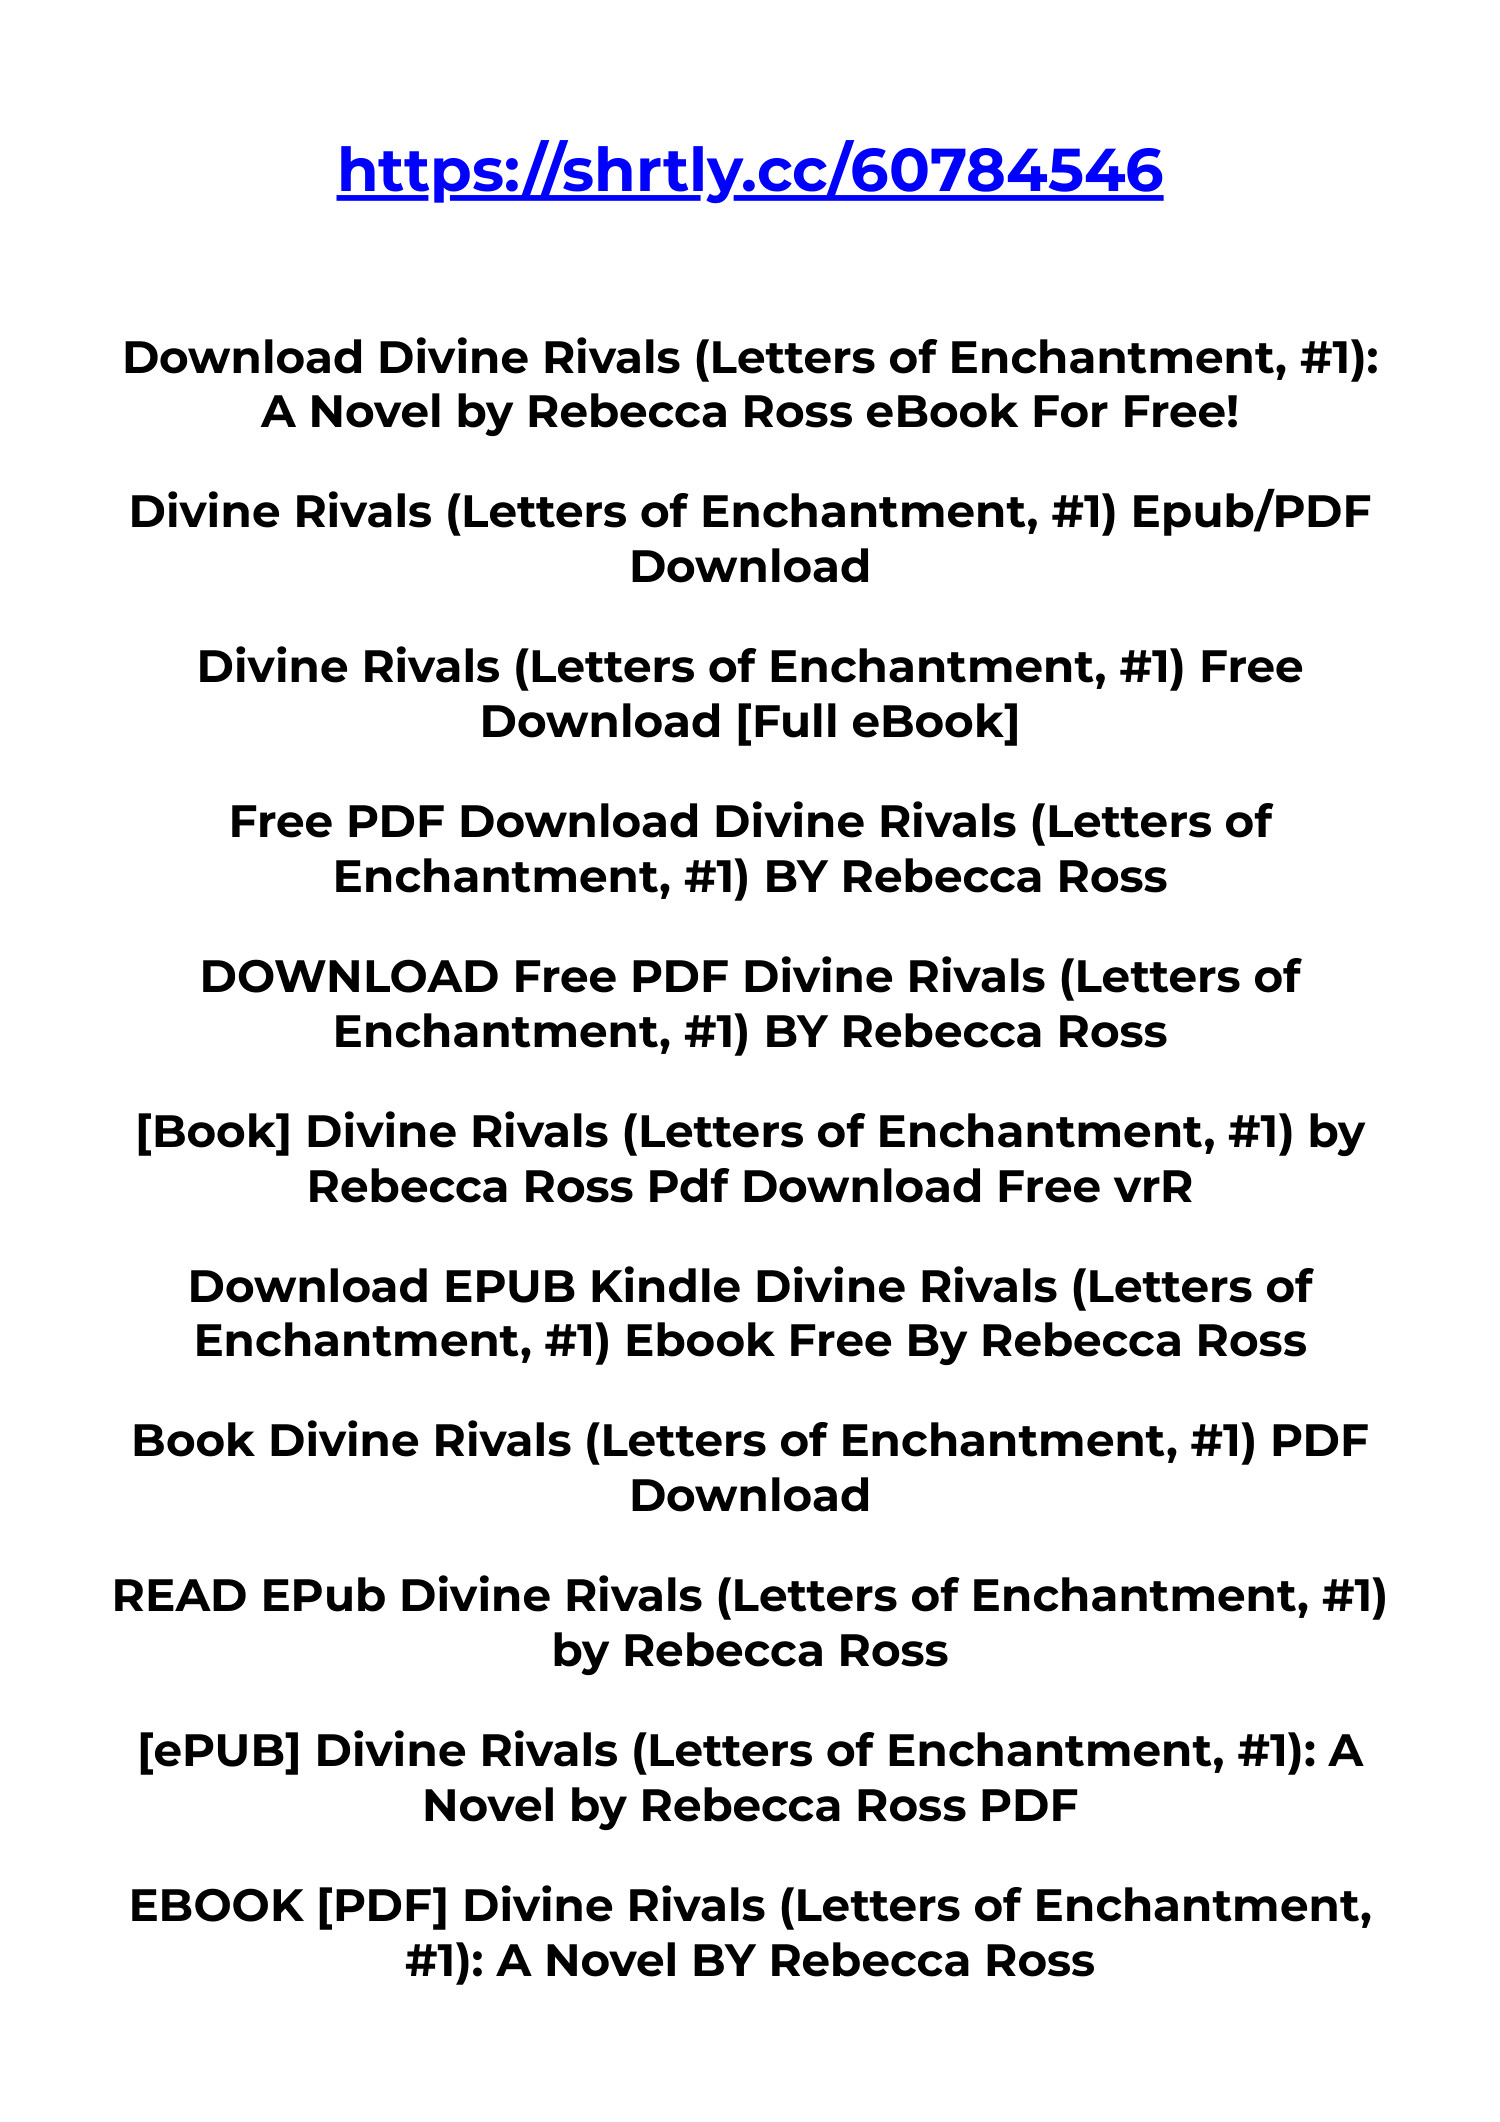 Divine Rivals (Letters of Enchantment, #1) by Rebecca Ross